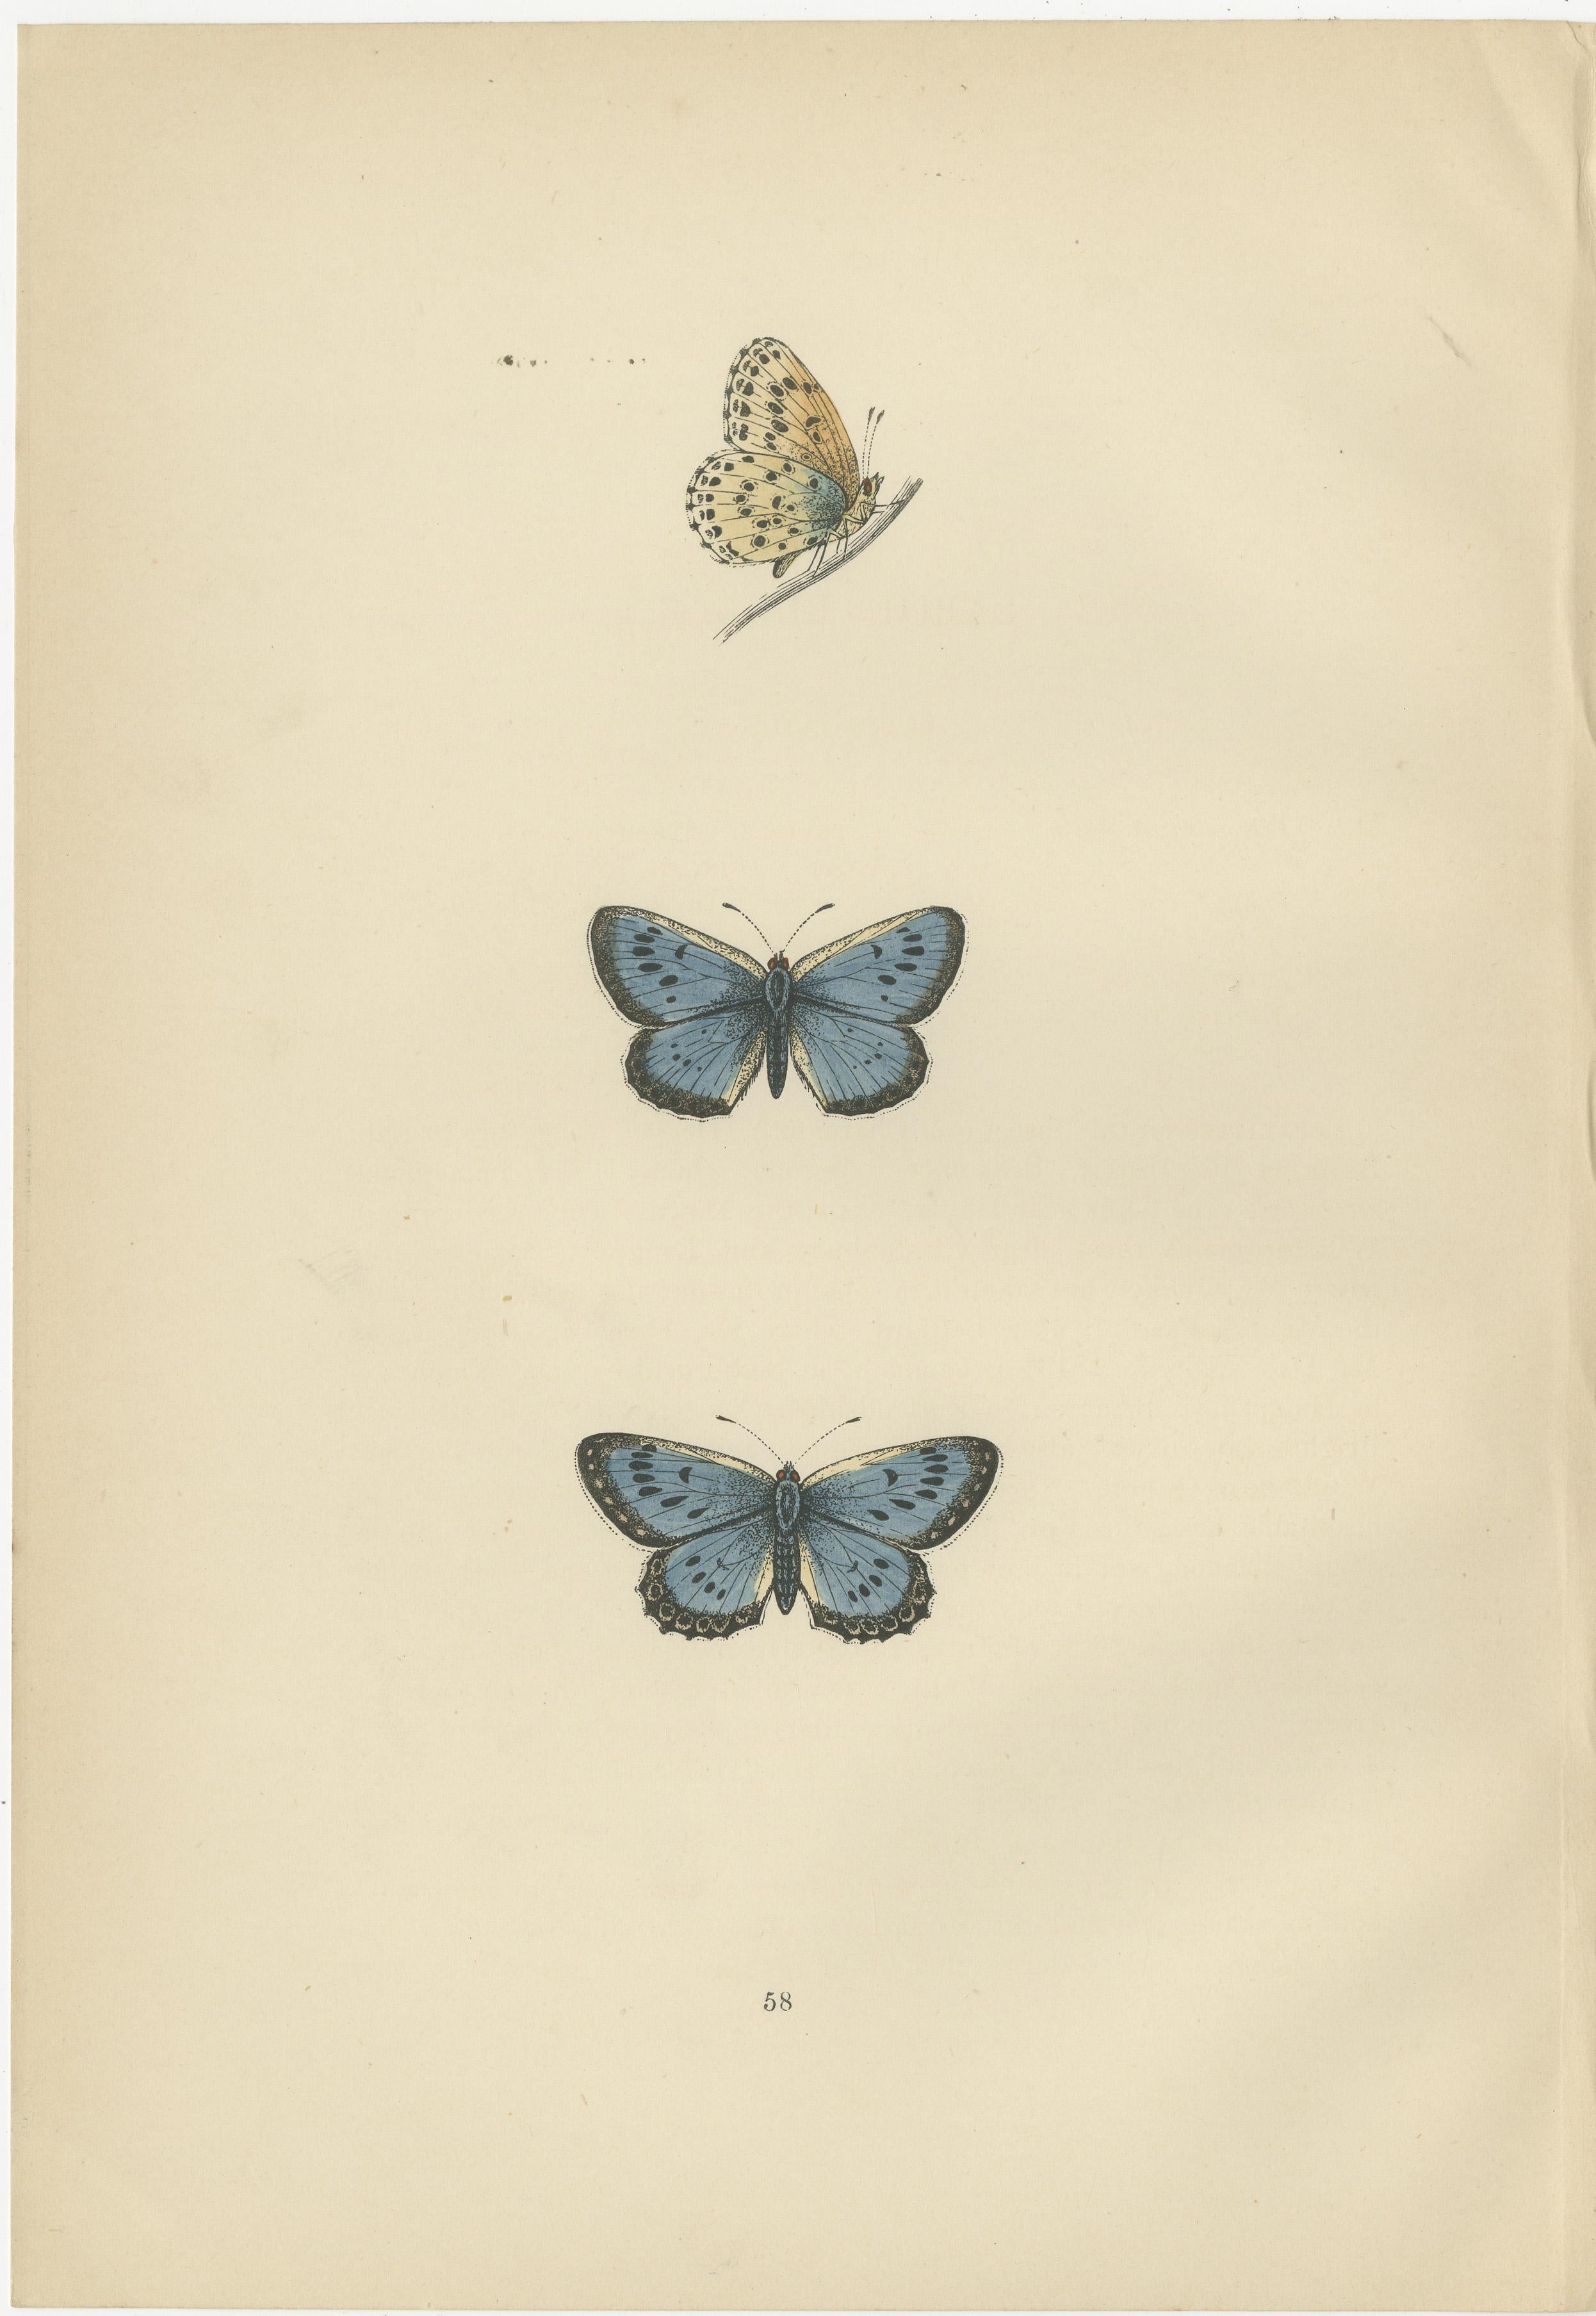 The three butterfly species depicted in the original hand-colored plates from the sixth edition of 